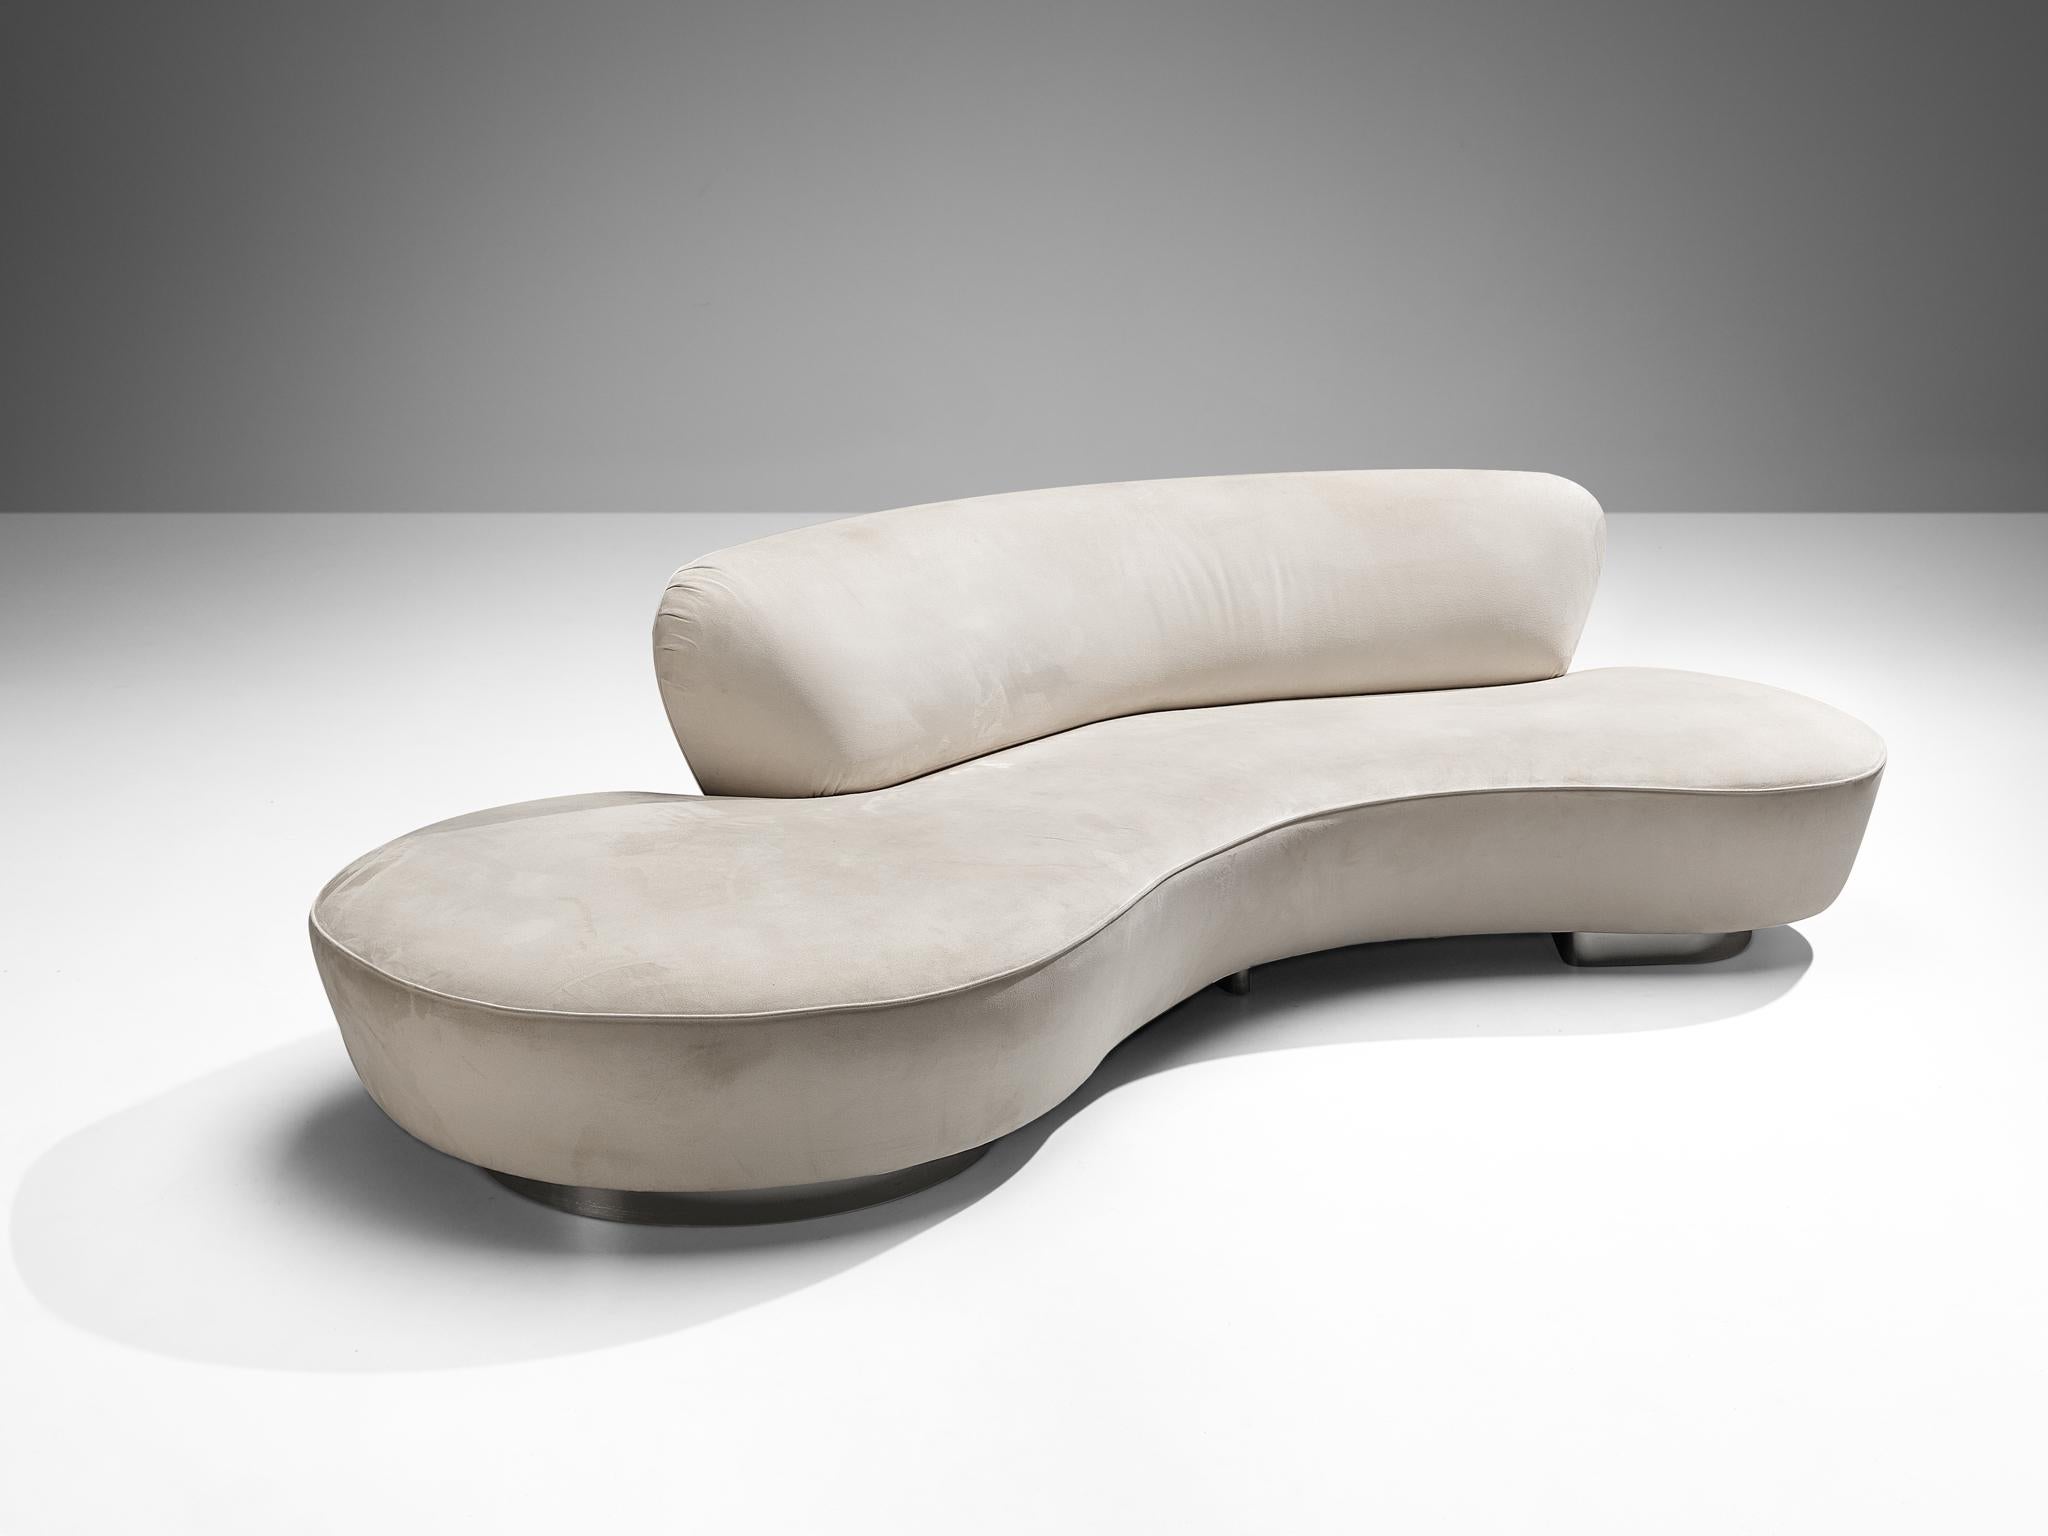 Iconic Vladimir Kagan ‘Serpentine’ Sofa and Ottoman in Off-White Upholstery 1